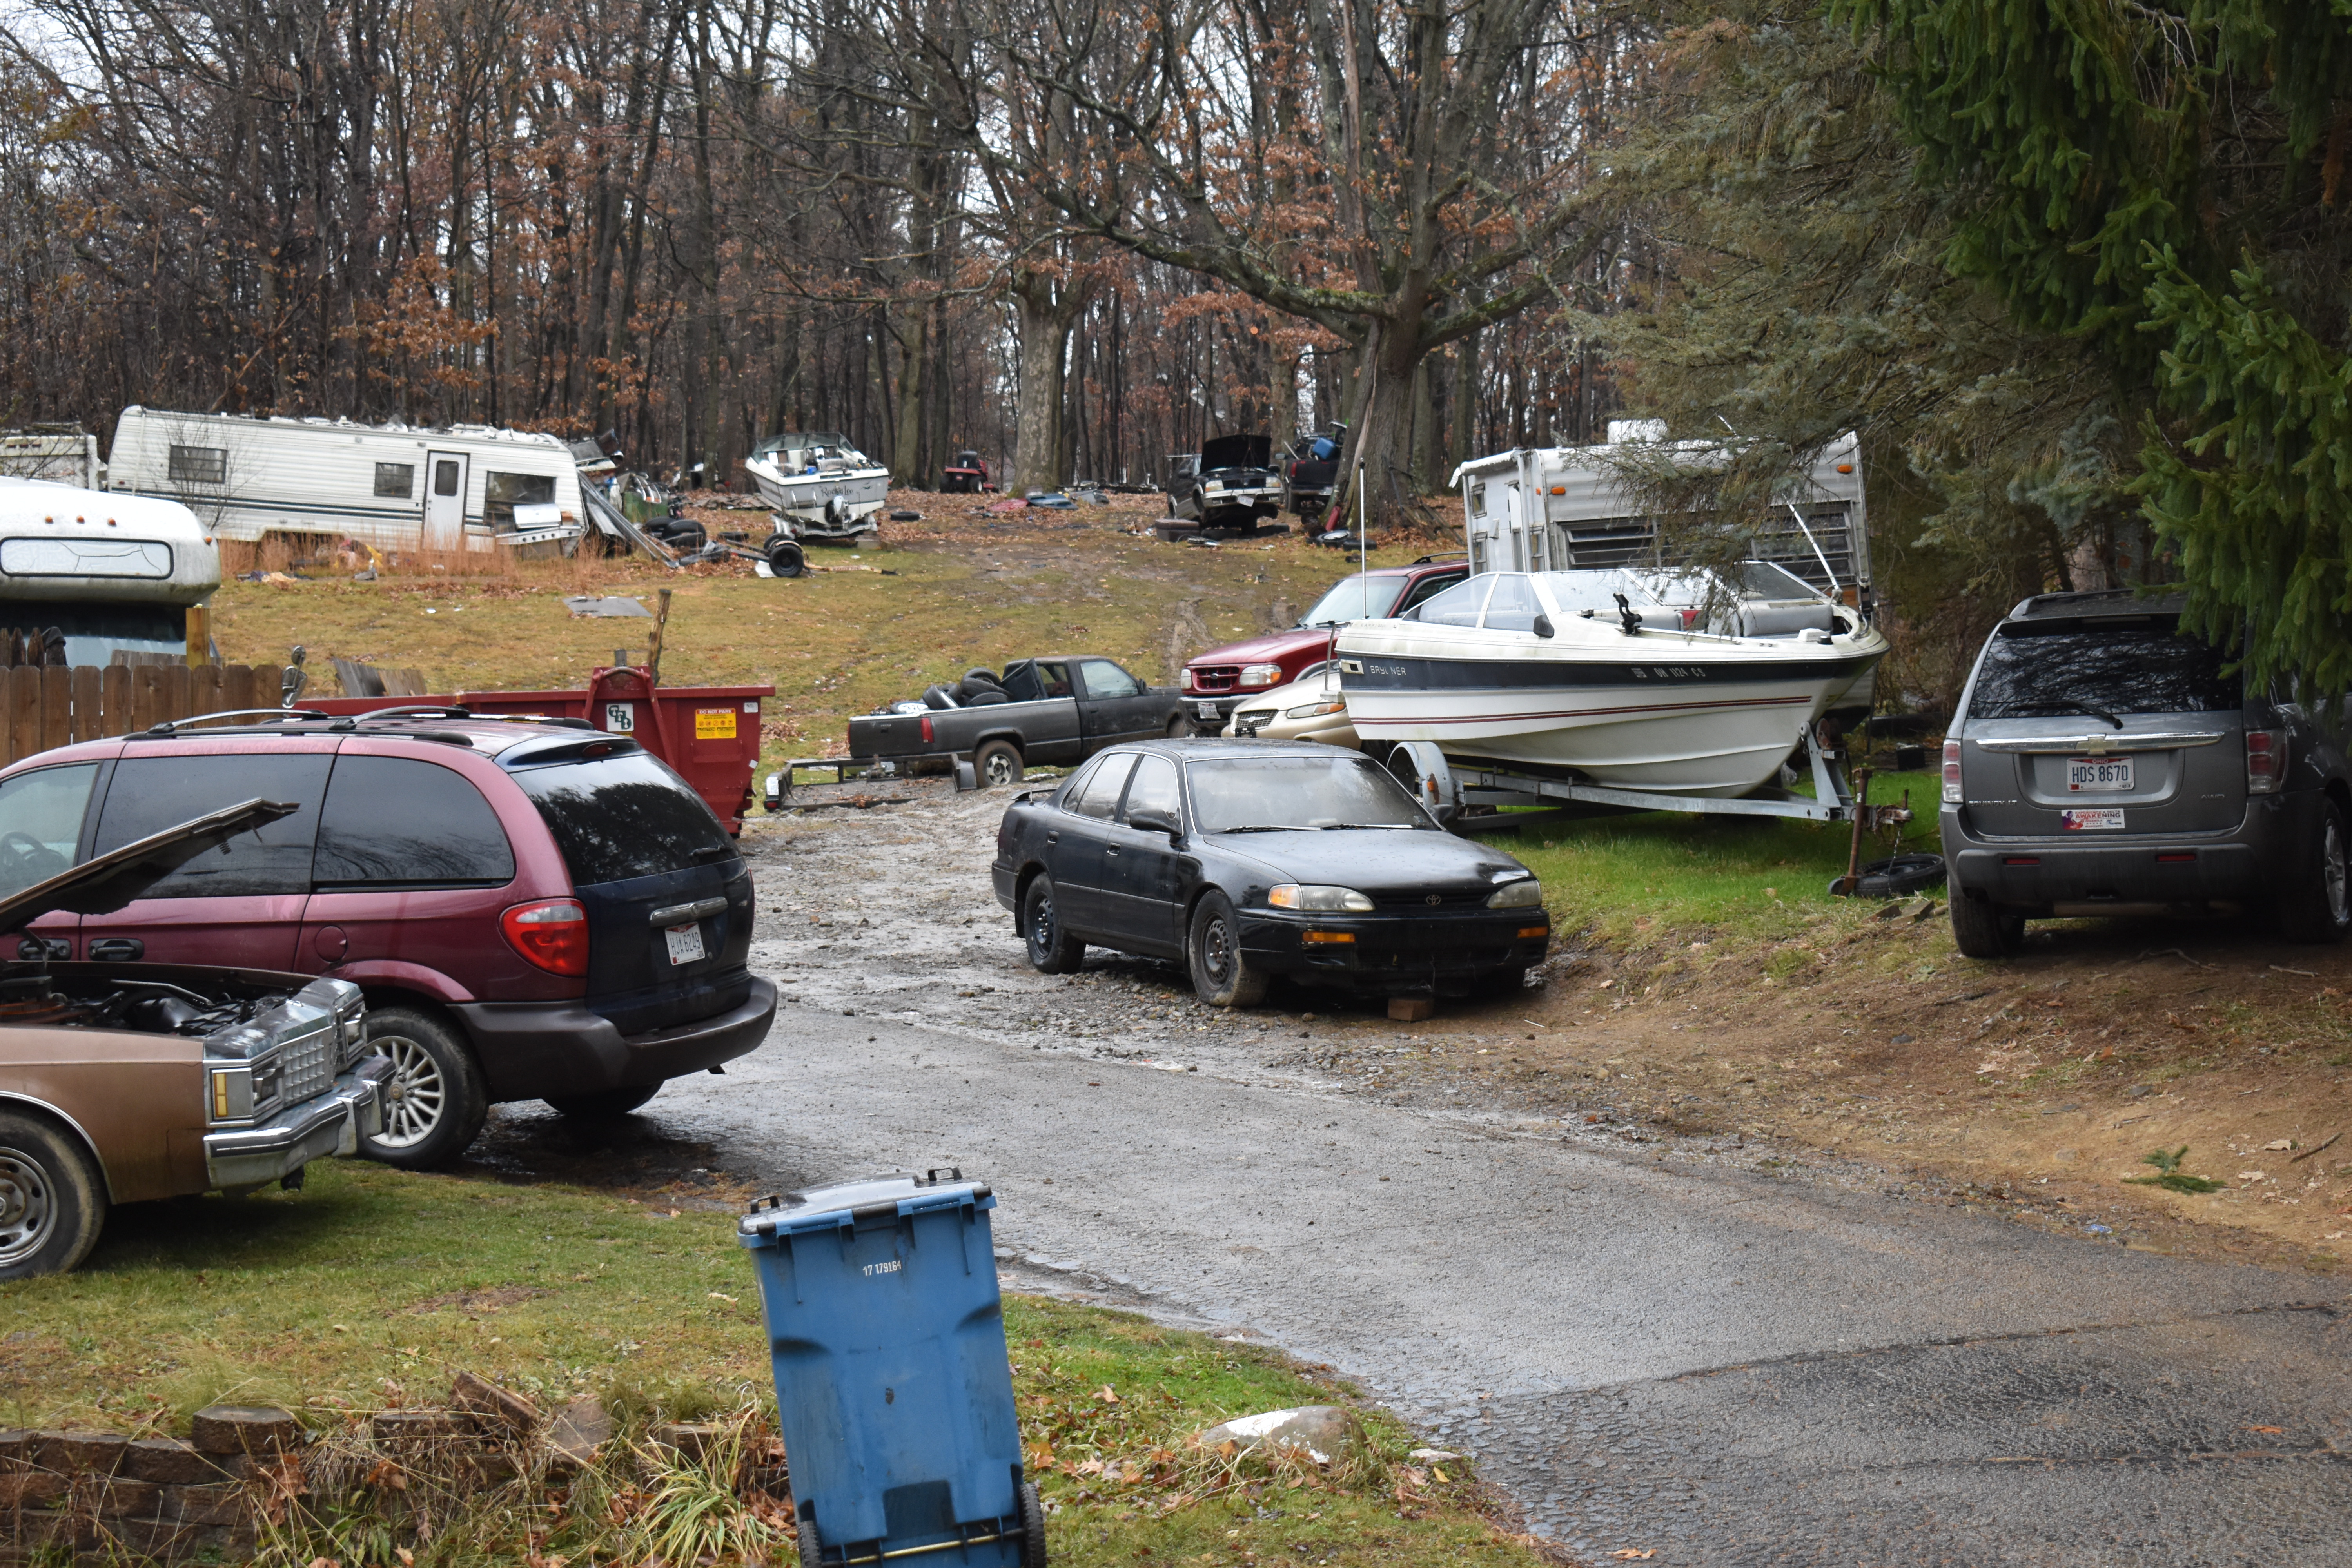 This is how the Phillips property looked just before the arrival of township officials on Nov. 27